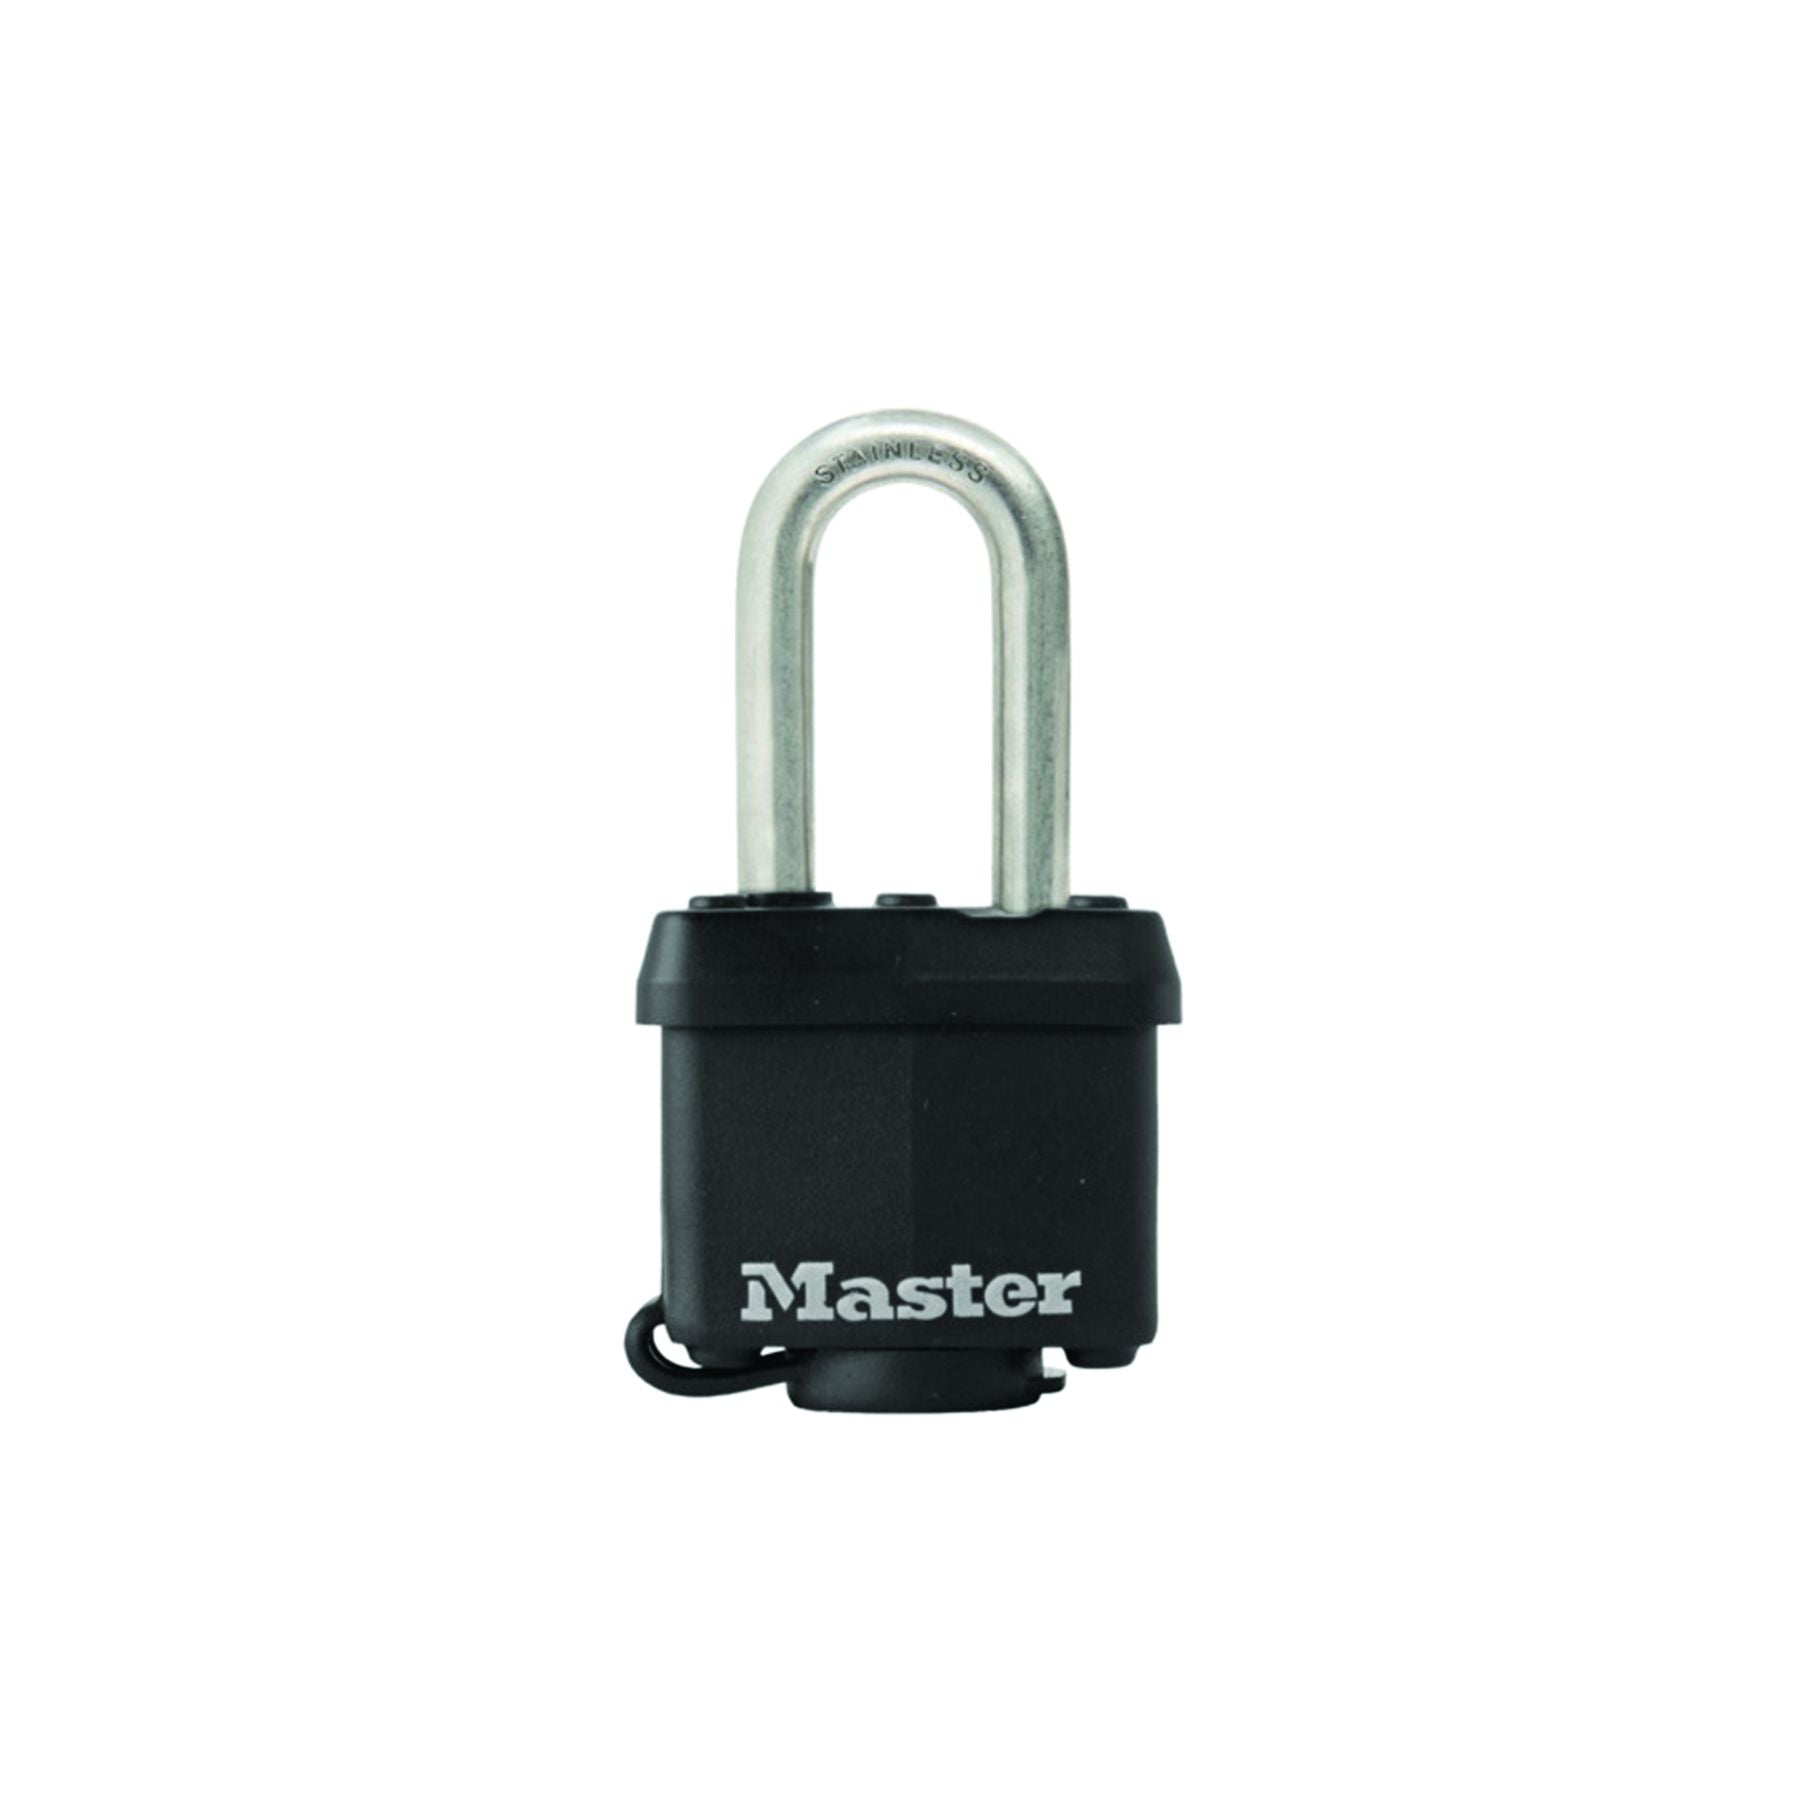 PADLOCK COVERED STAINLESS STEEL HANDLE 1 9/16" x 1 1/2"